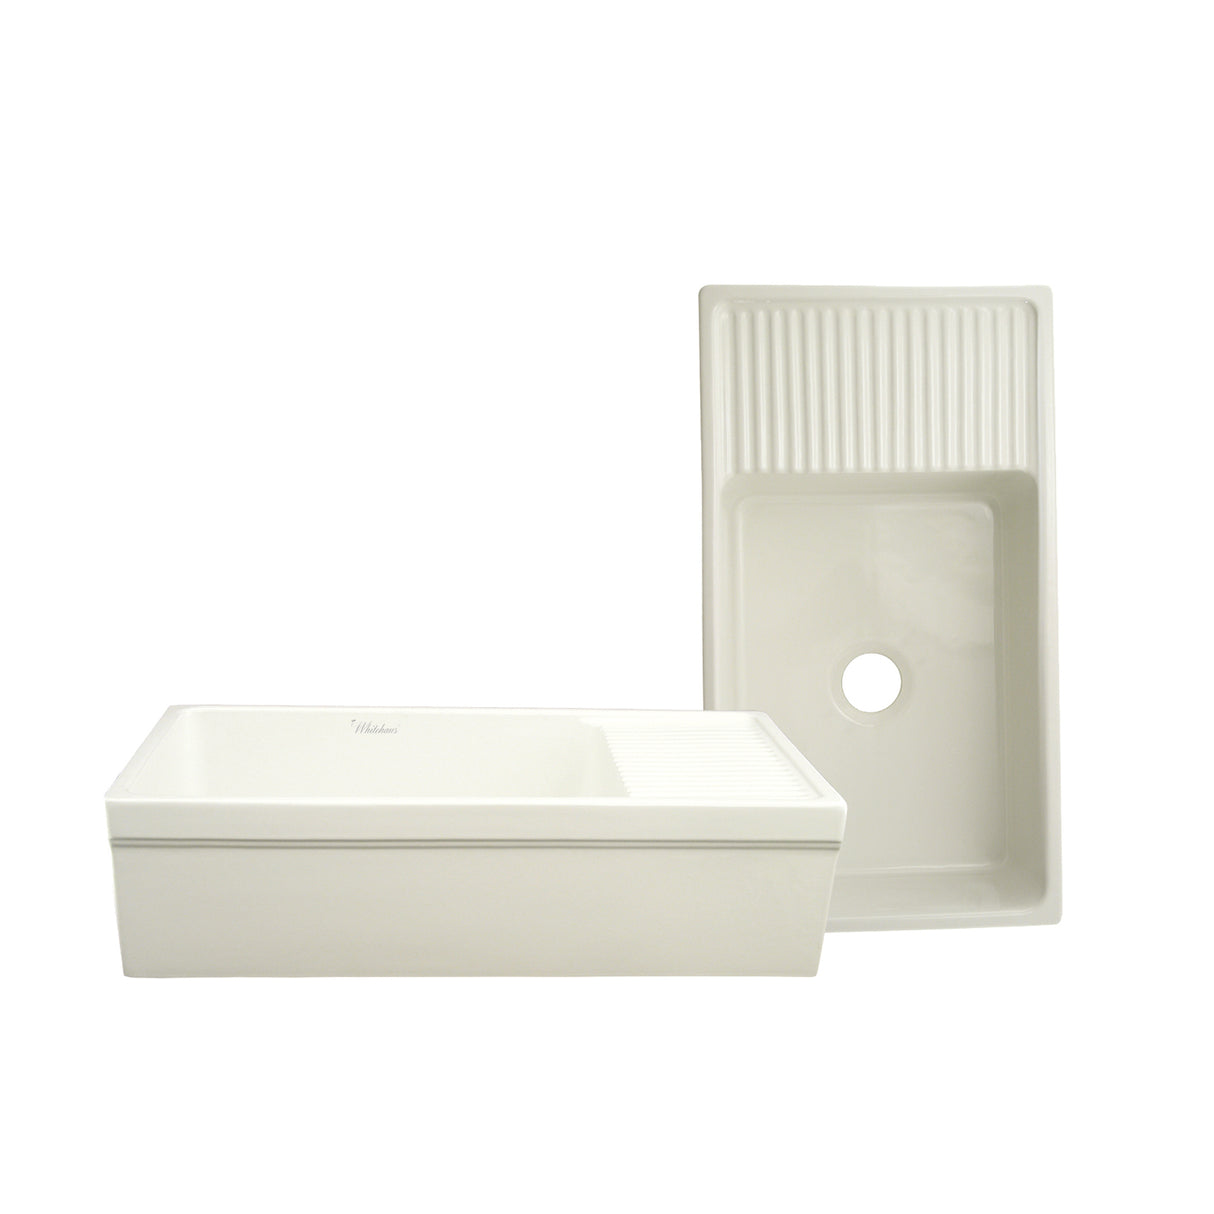 Farmhaus Fireclay Quatro Alcove Large Reversible Sink with Integral Drainboard and Decorative 2 ½" Lip on Both Sides